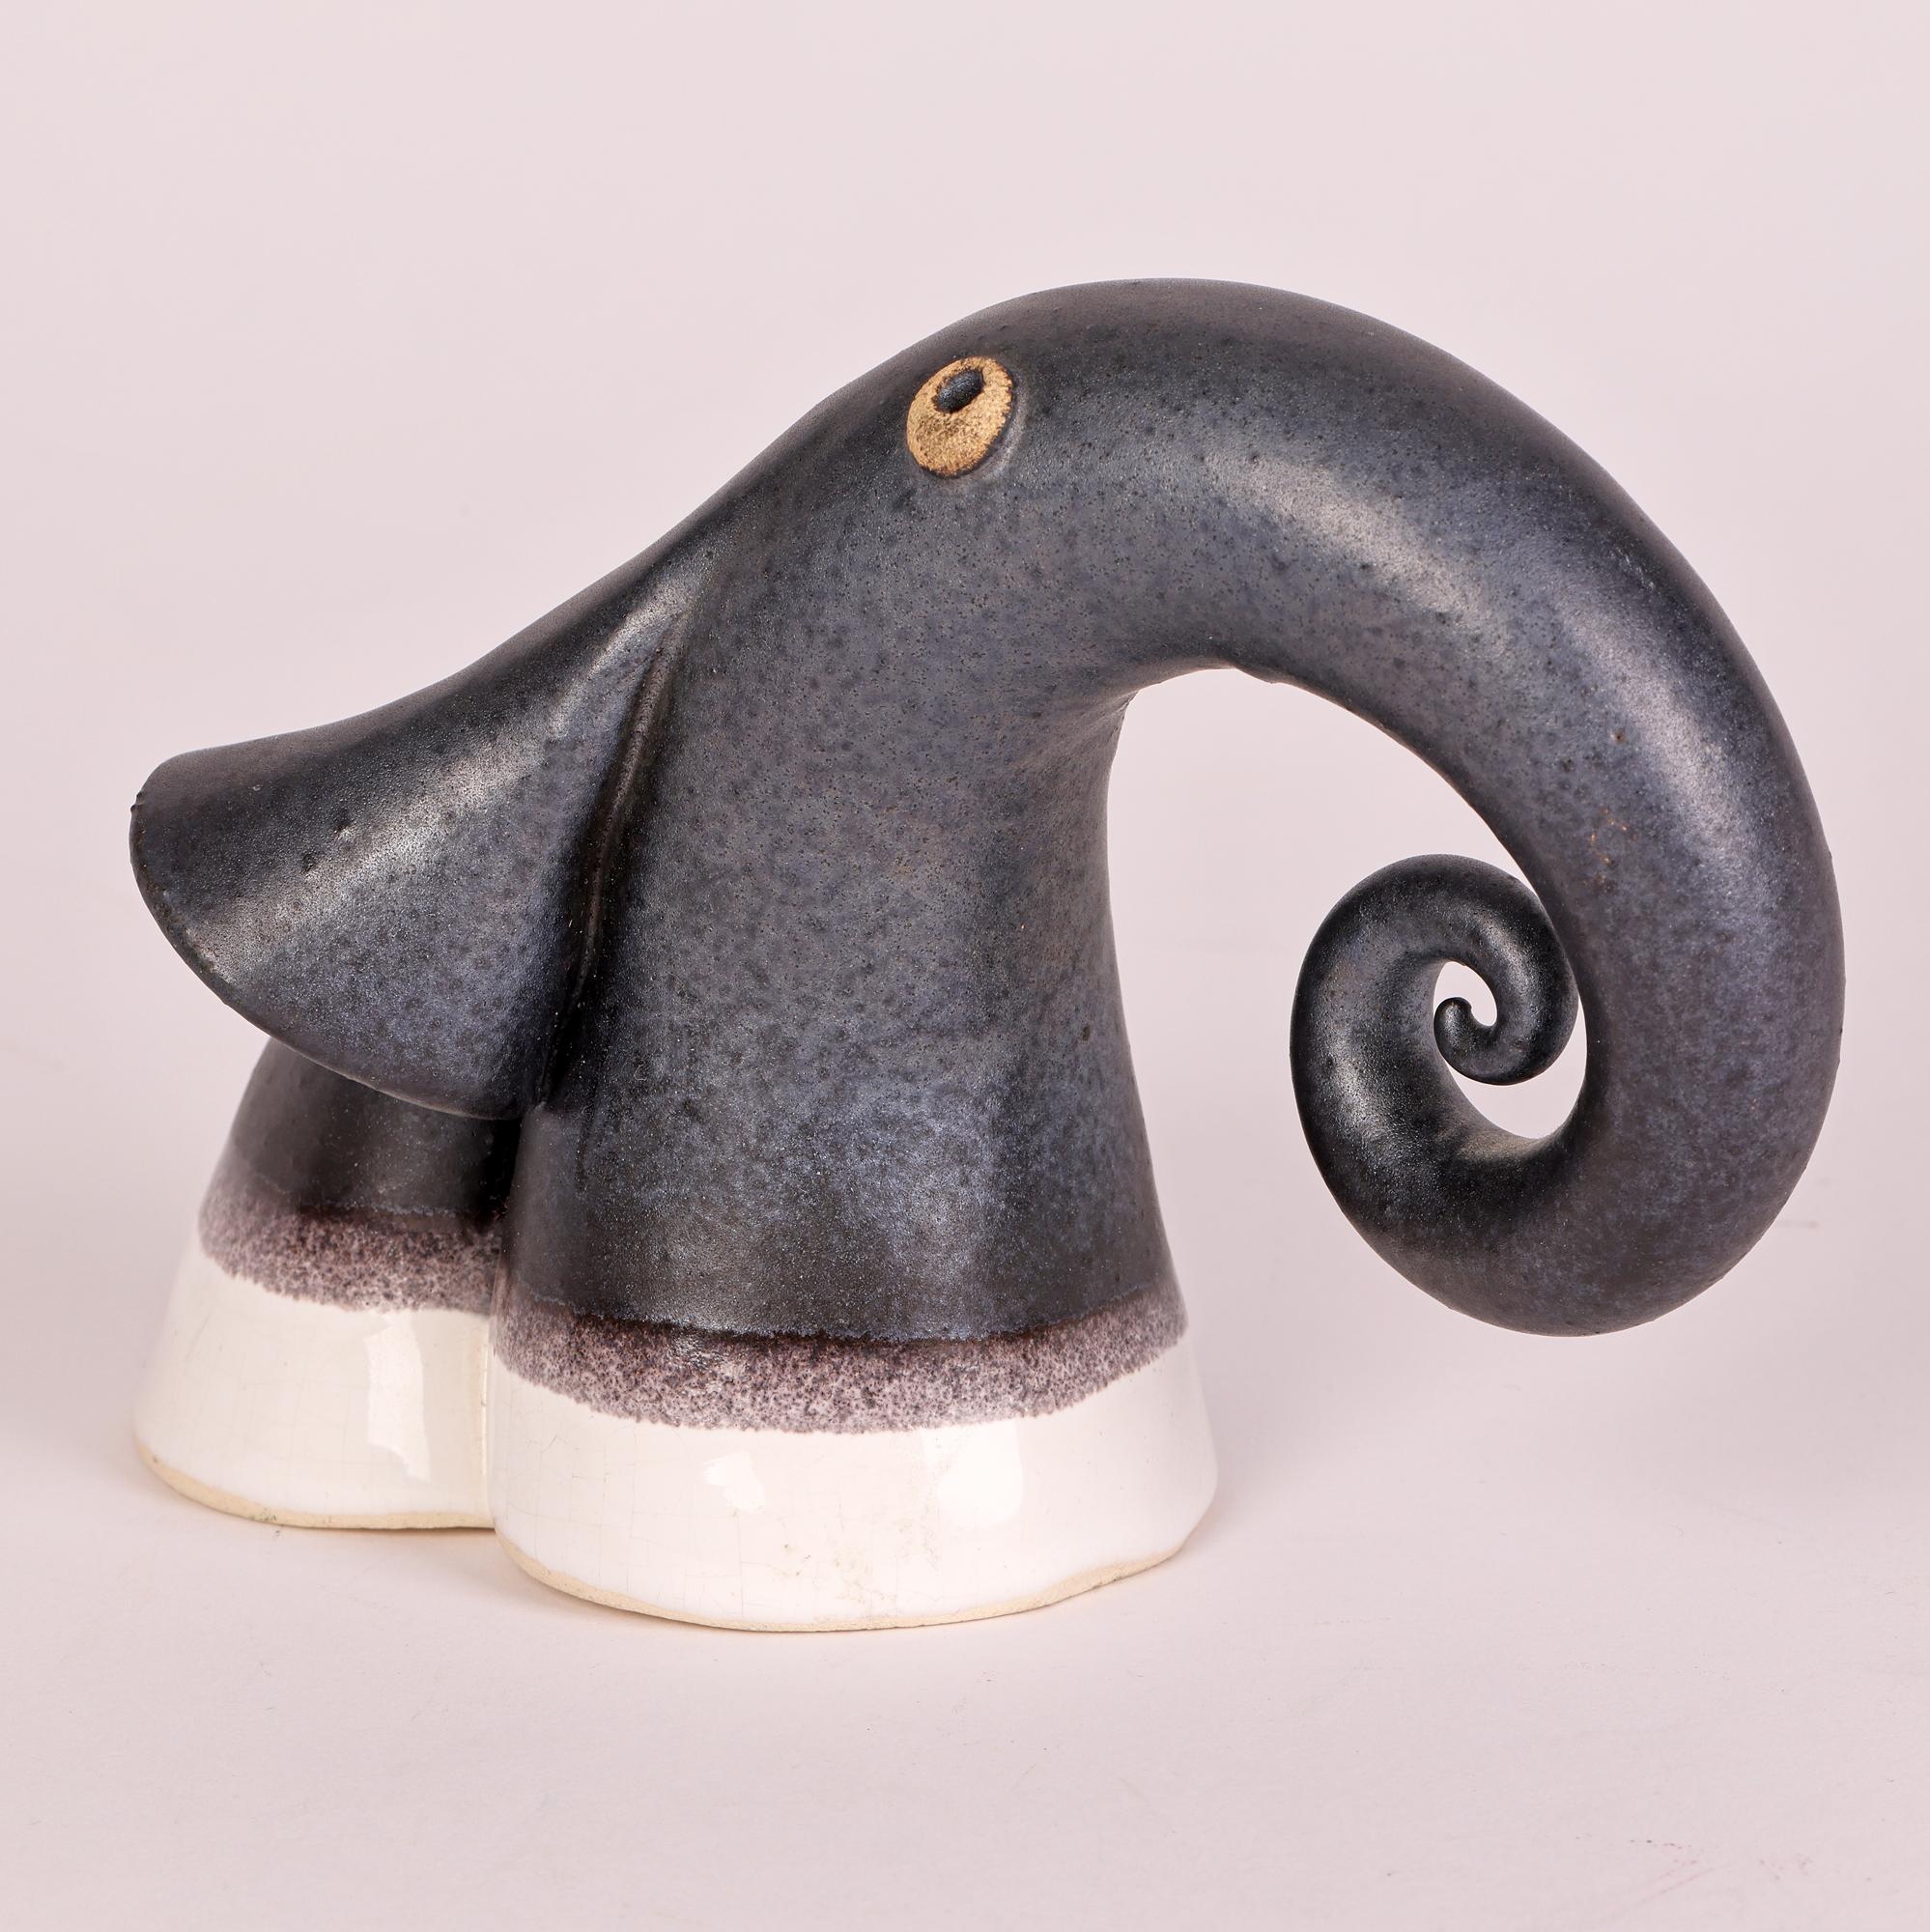 Unusual Studio Pottery Stylized Elephant Figure In Good Condition For Sale In Bishop's Stortford, Hertfordshire